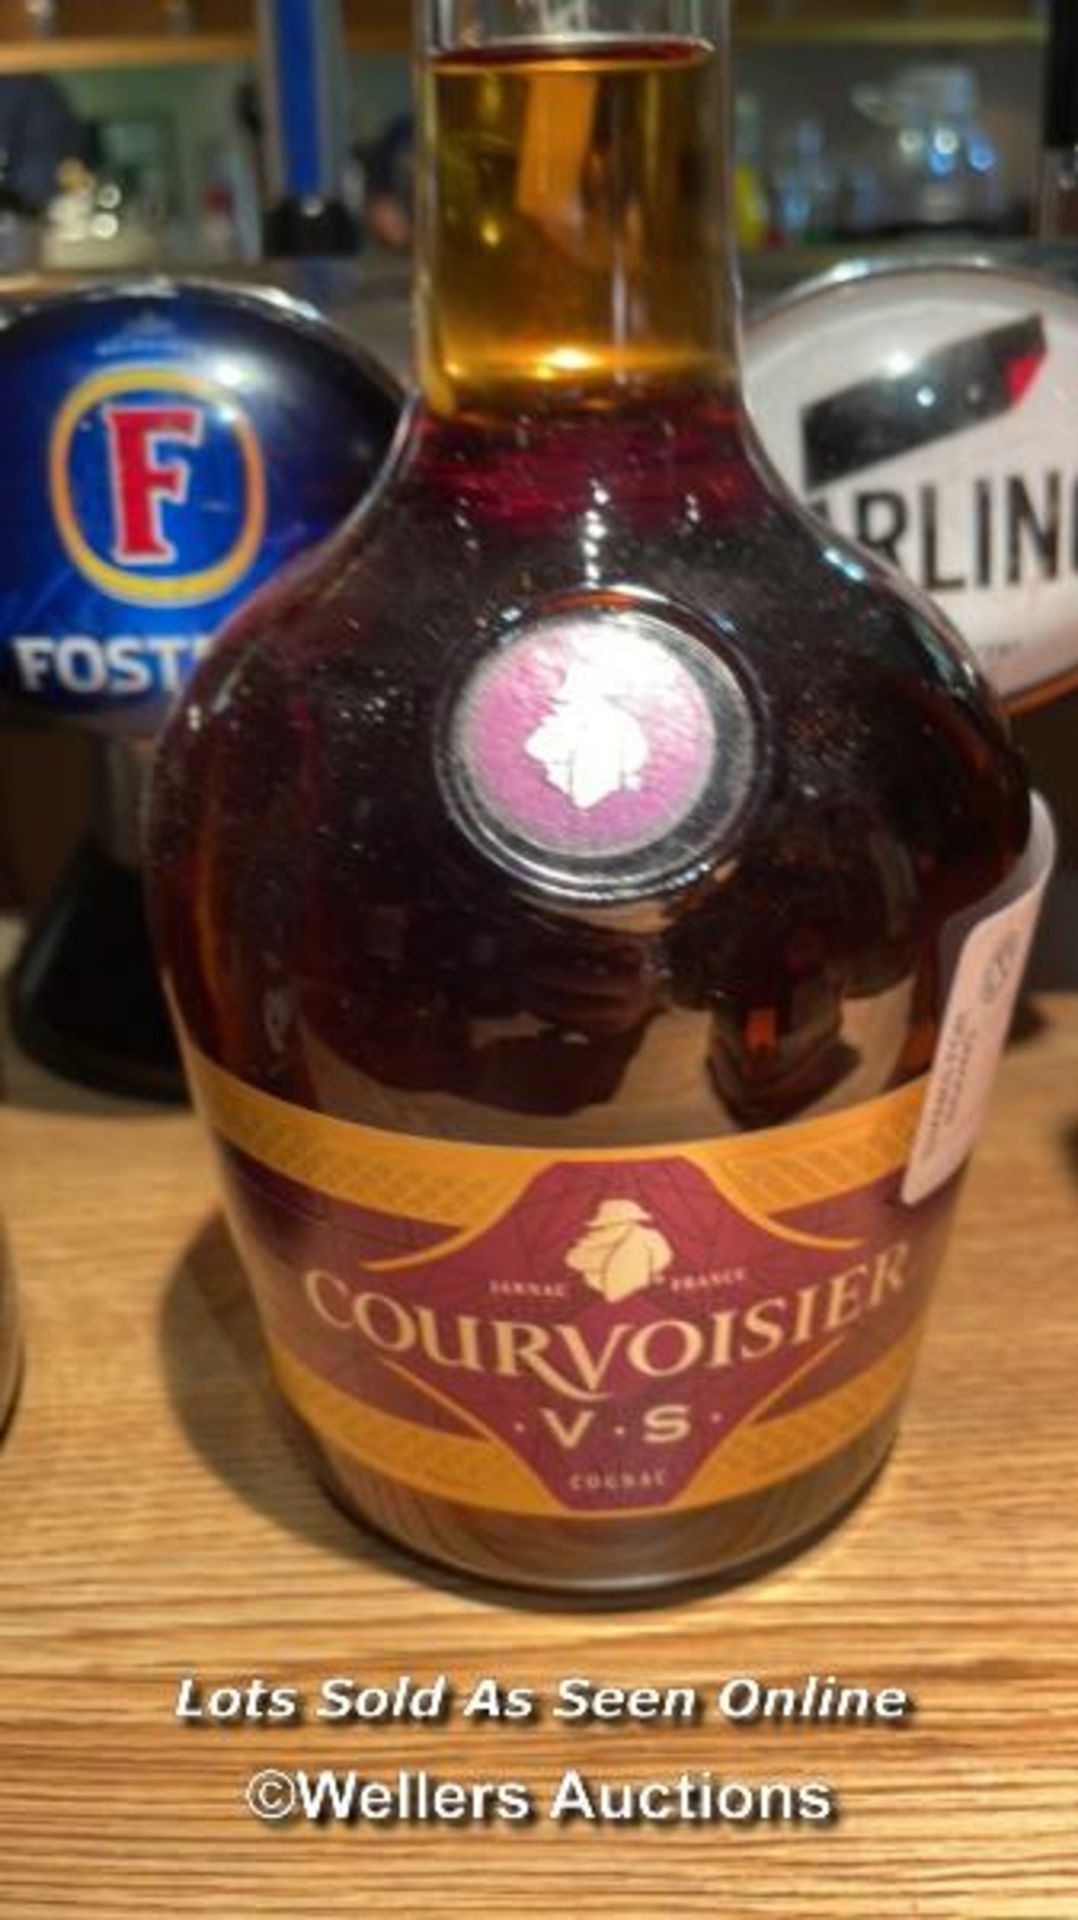 COURVOISIER V.S COGNAC, 700ML, 40% VOL / COLLECTION LOCATION: OLD WOKING DISTRICT RECREATION CLUB, - Image 2 of 2